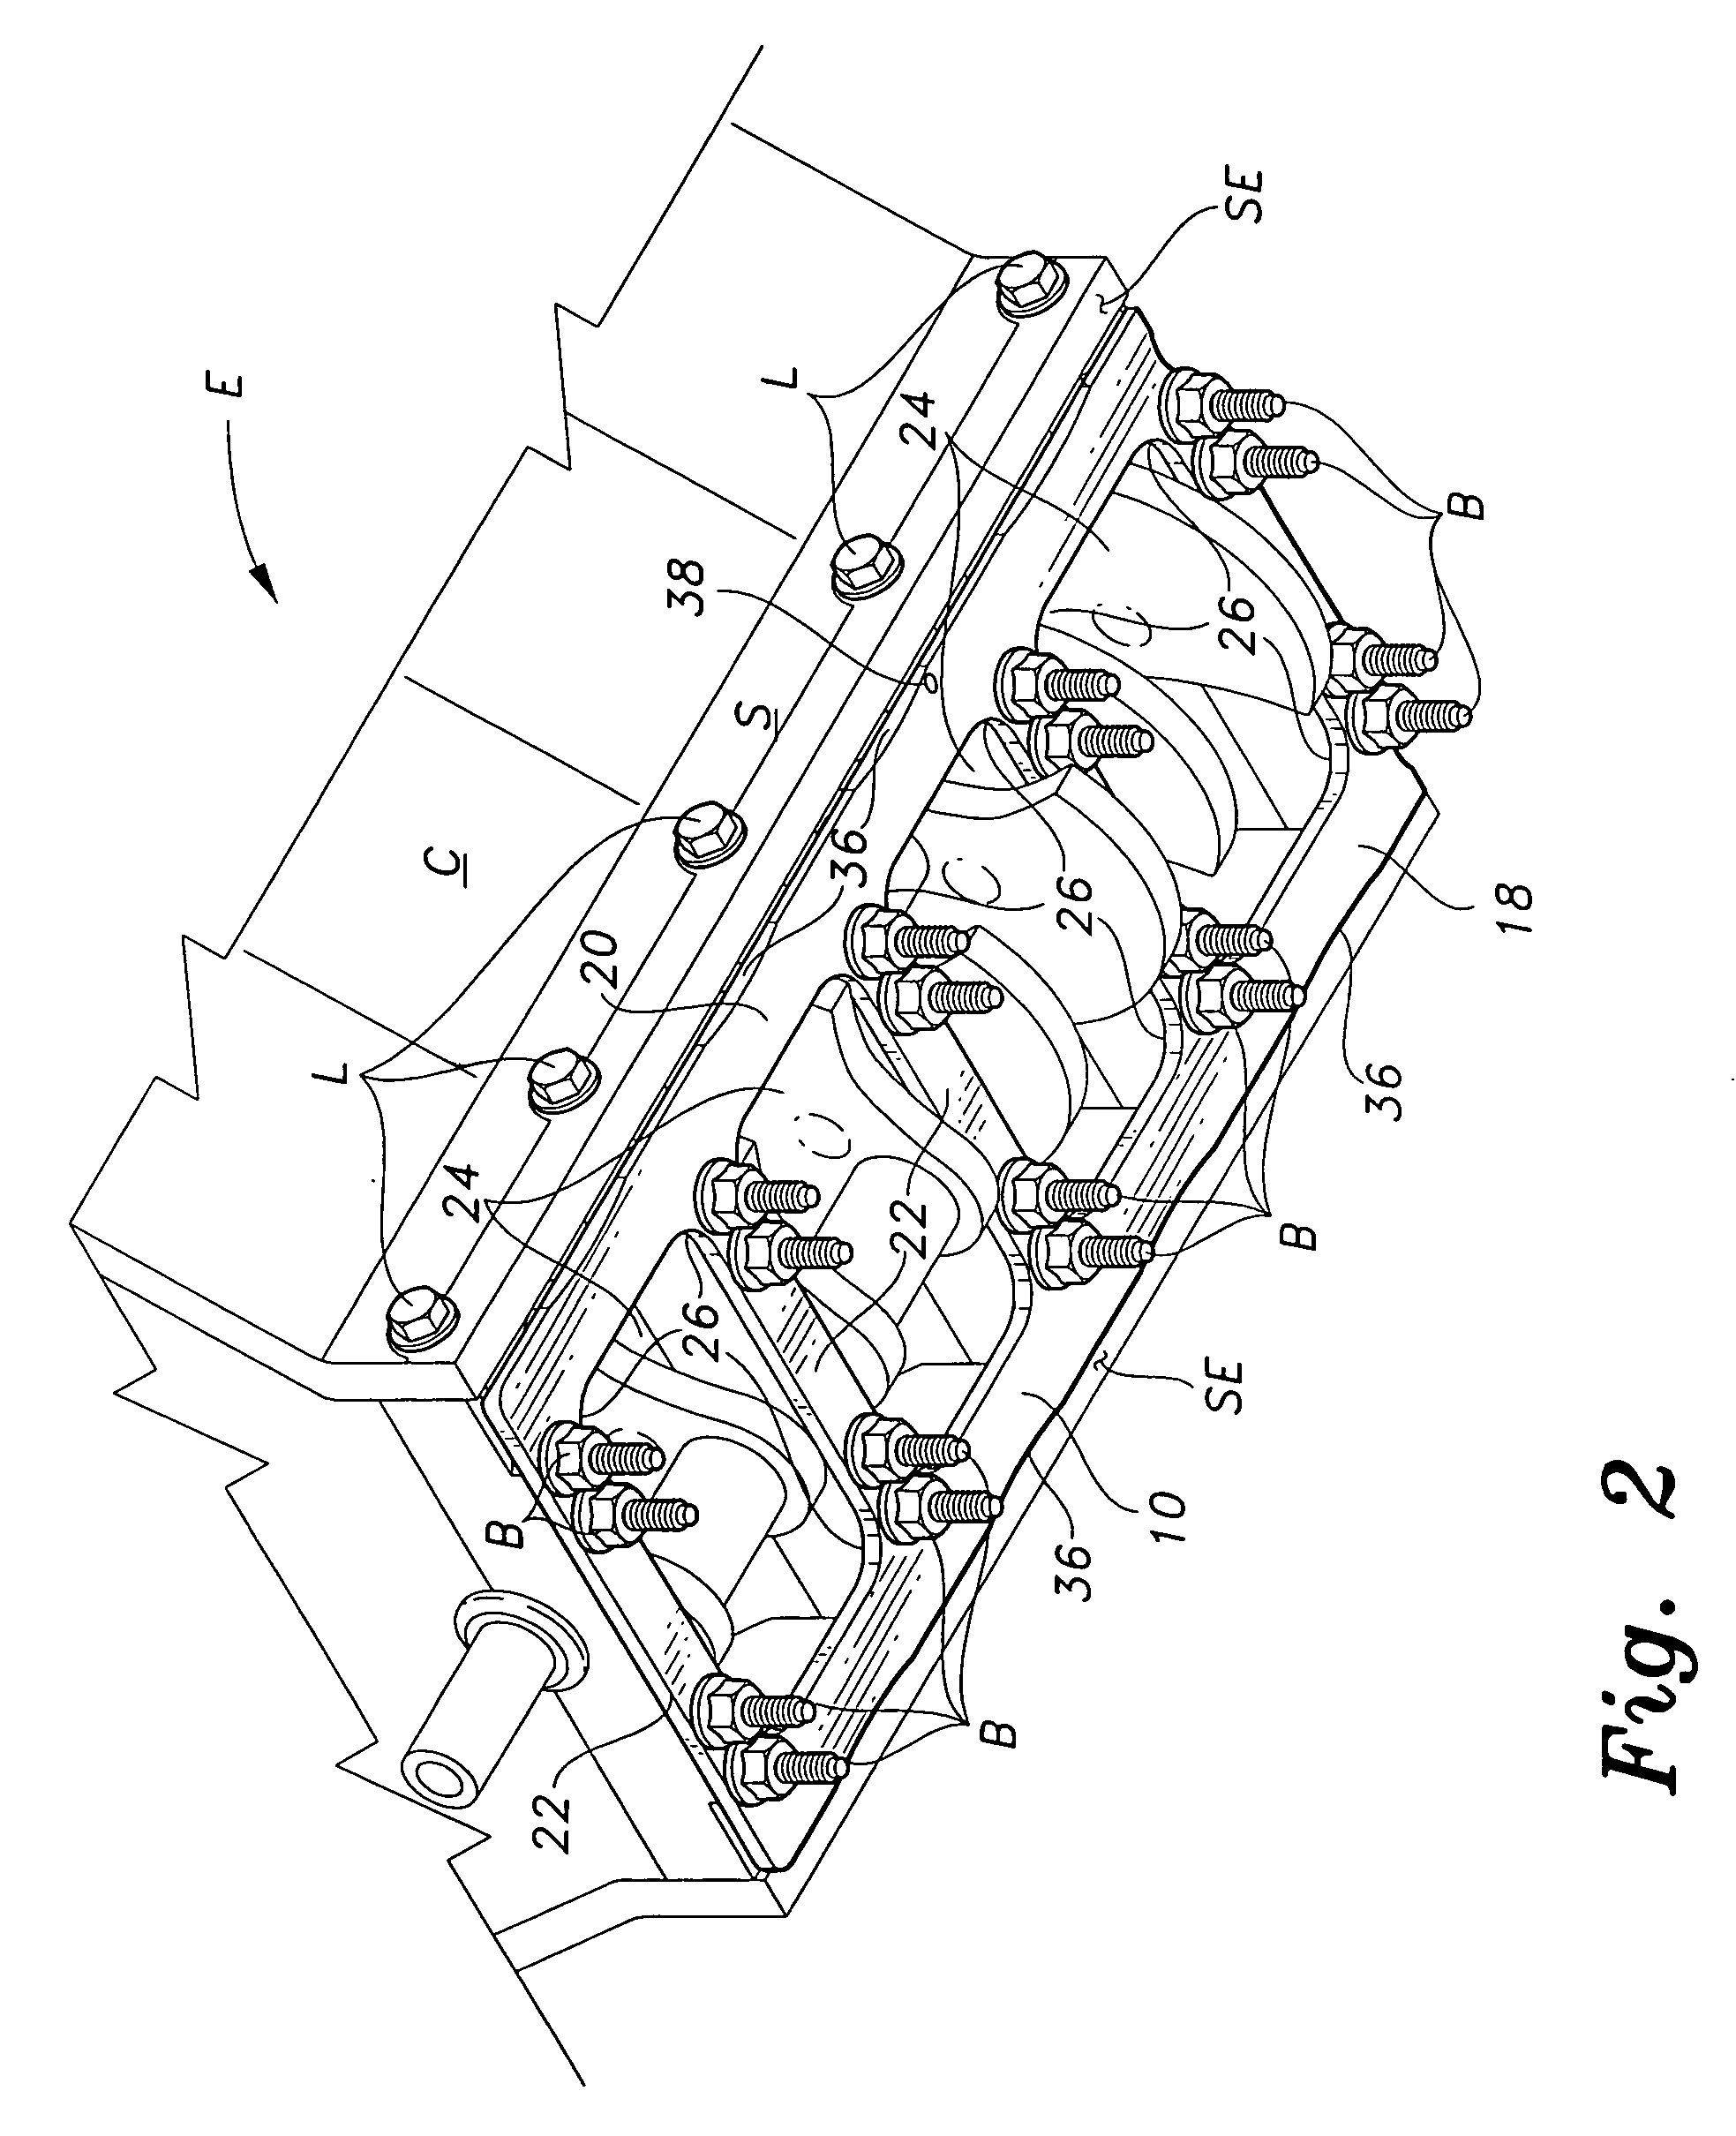 Reinforcement plate for a reciprocating engine